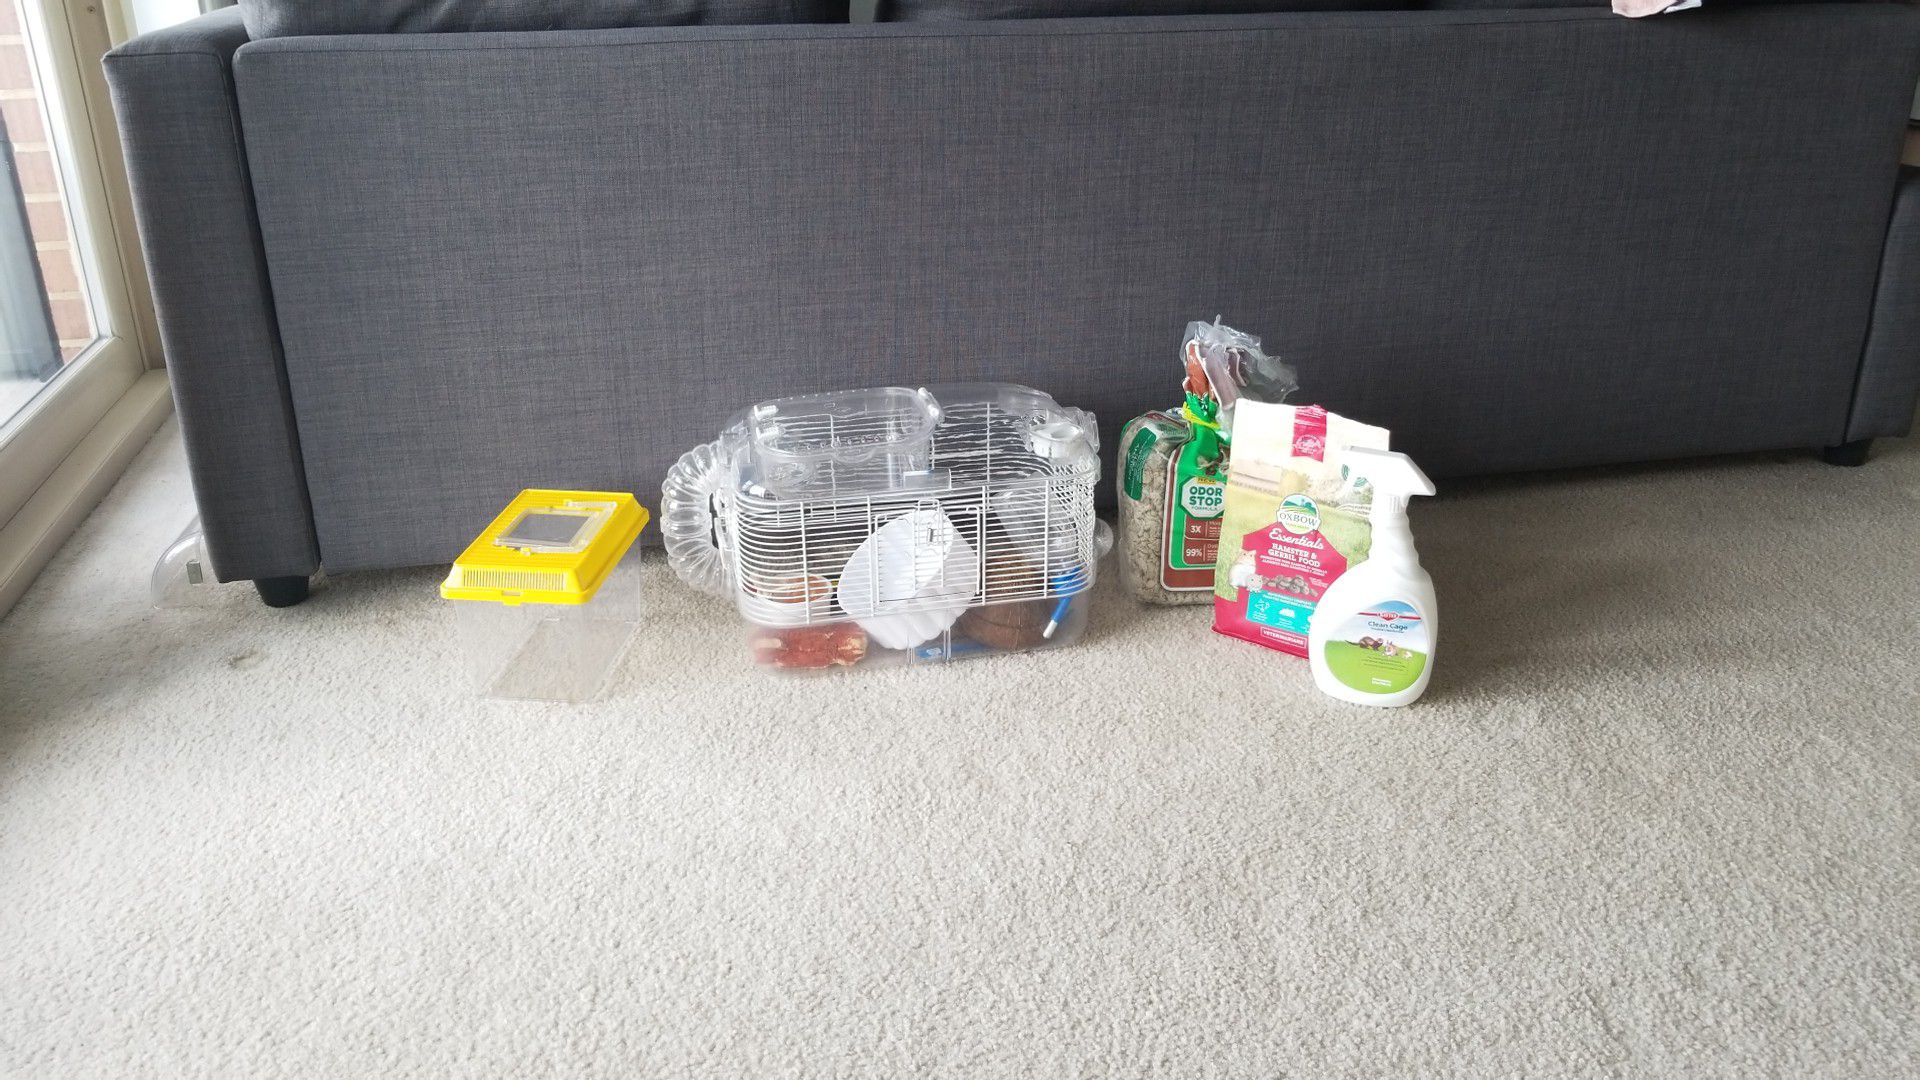 Complete hamster or mouse habitat with lots of accessories